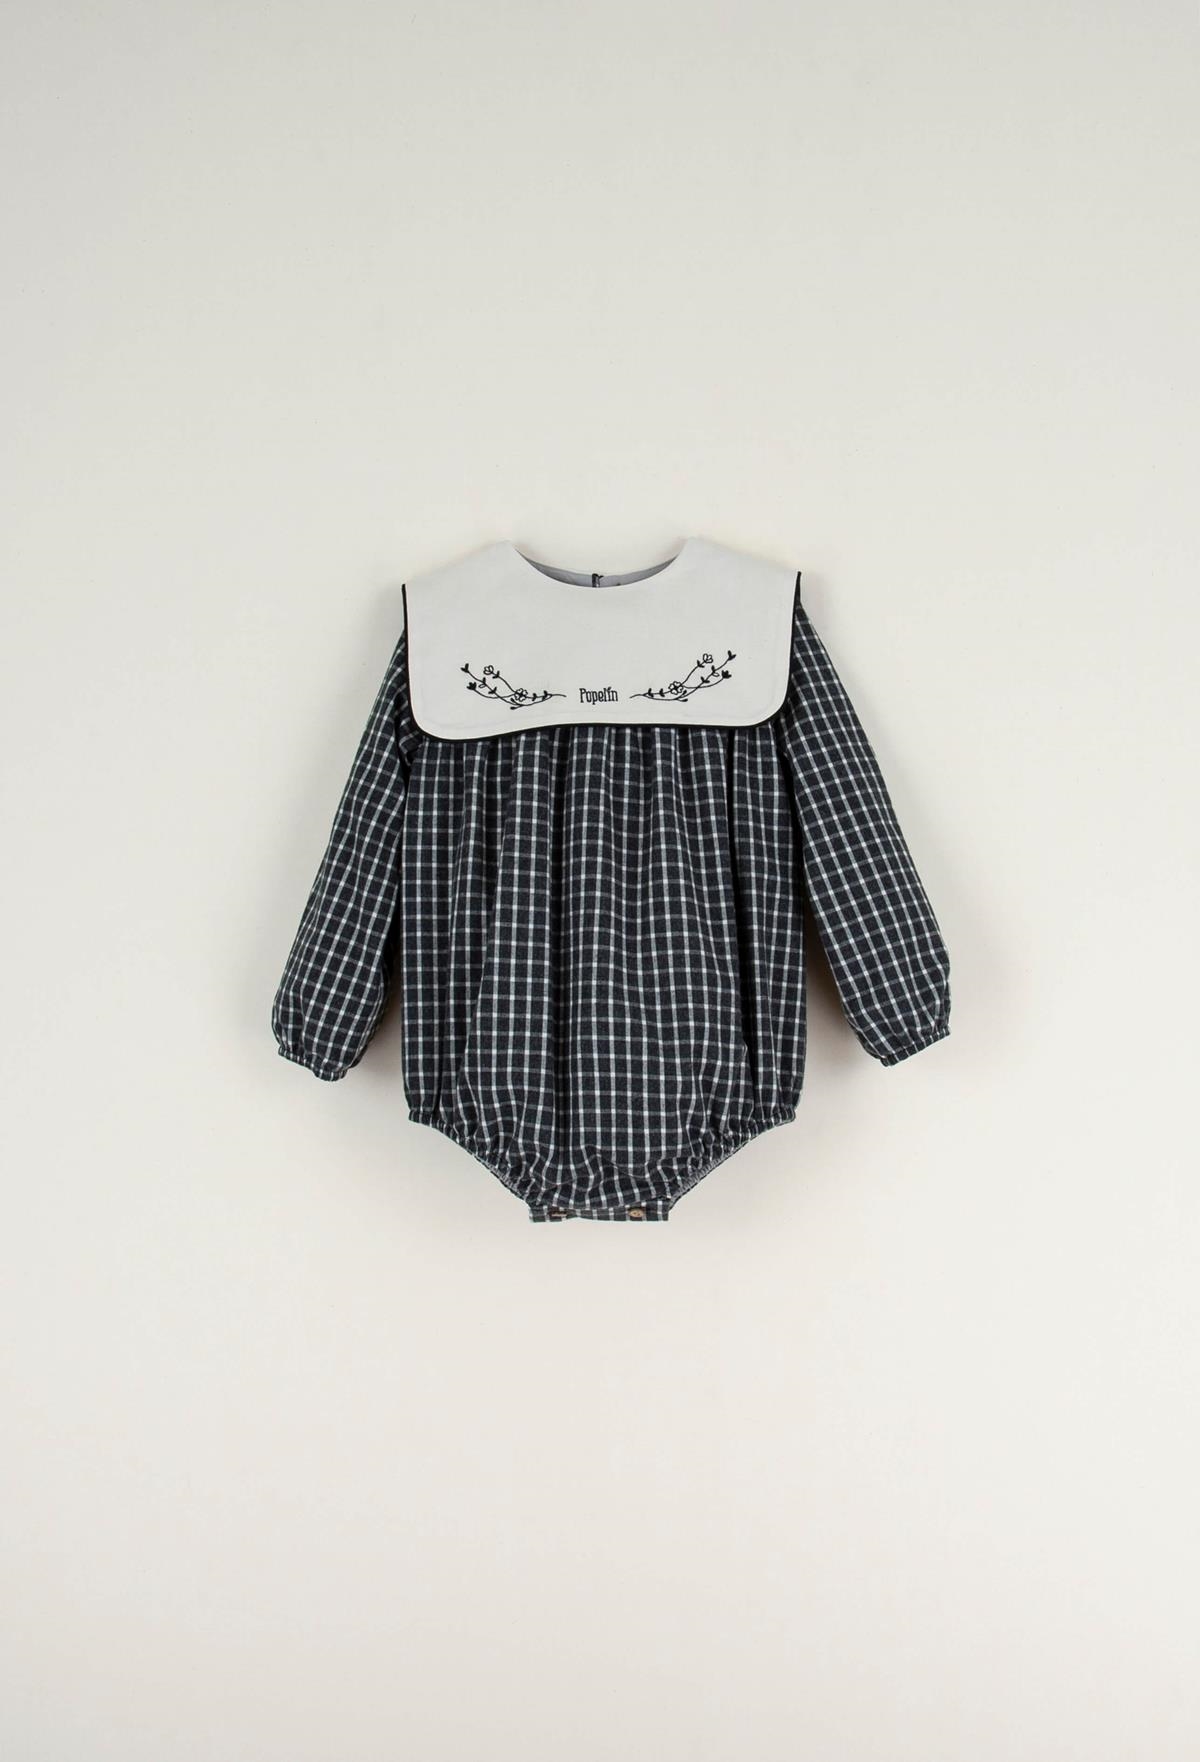 Mod.2.2 Black plaid embroidered romper suit with yoke | AW22.23 Mod.2.2 Black plaid embroidered romper suit with yoke